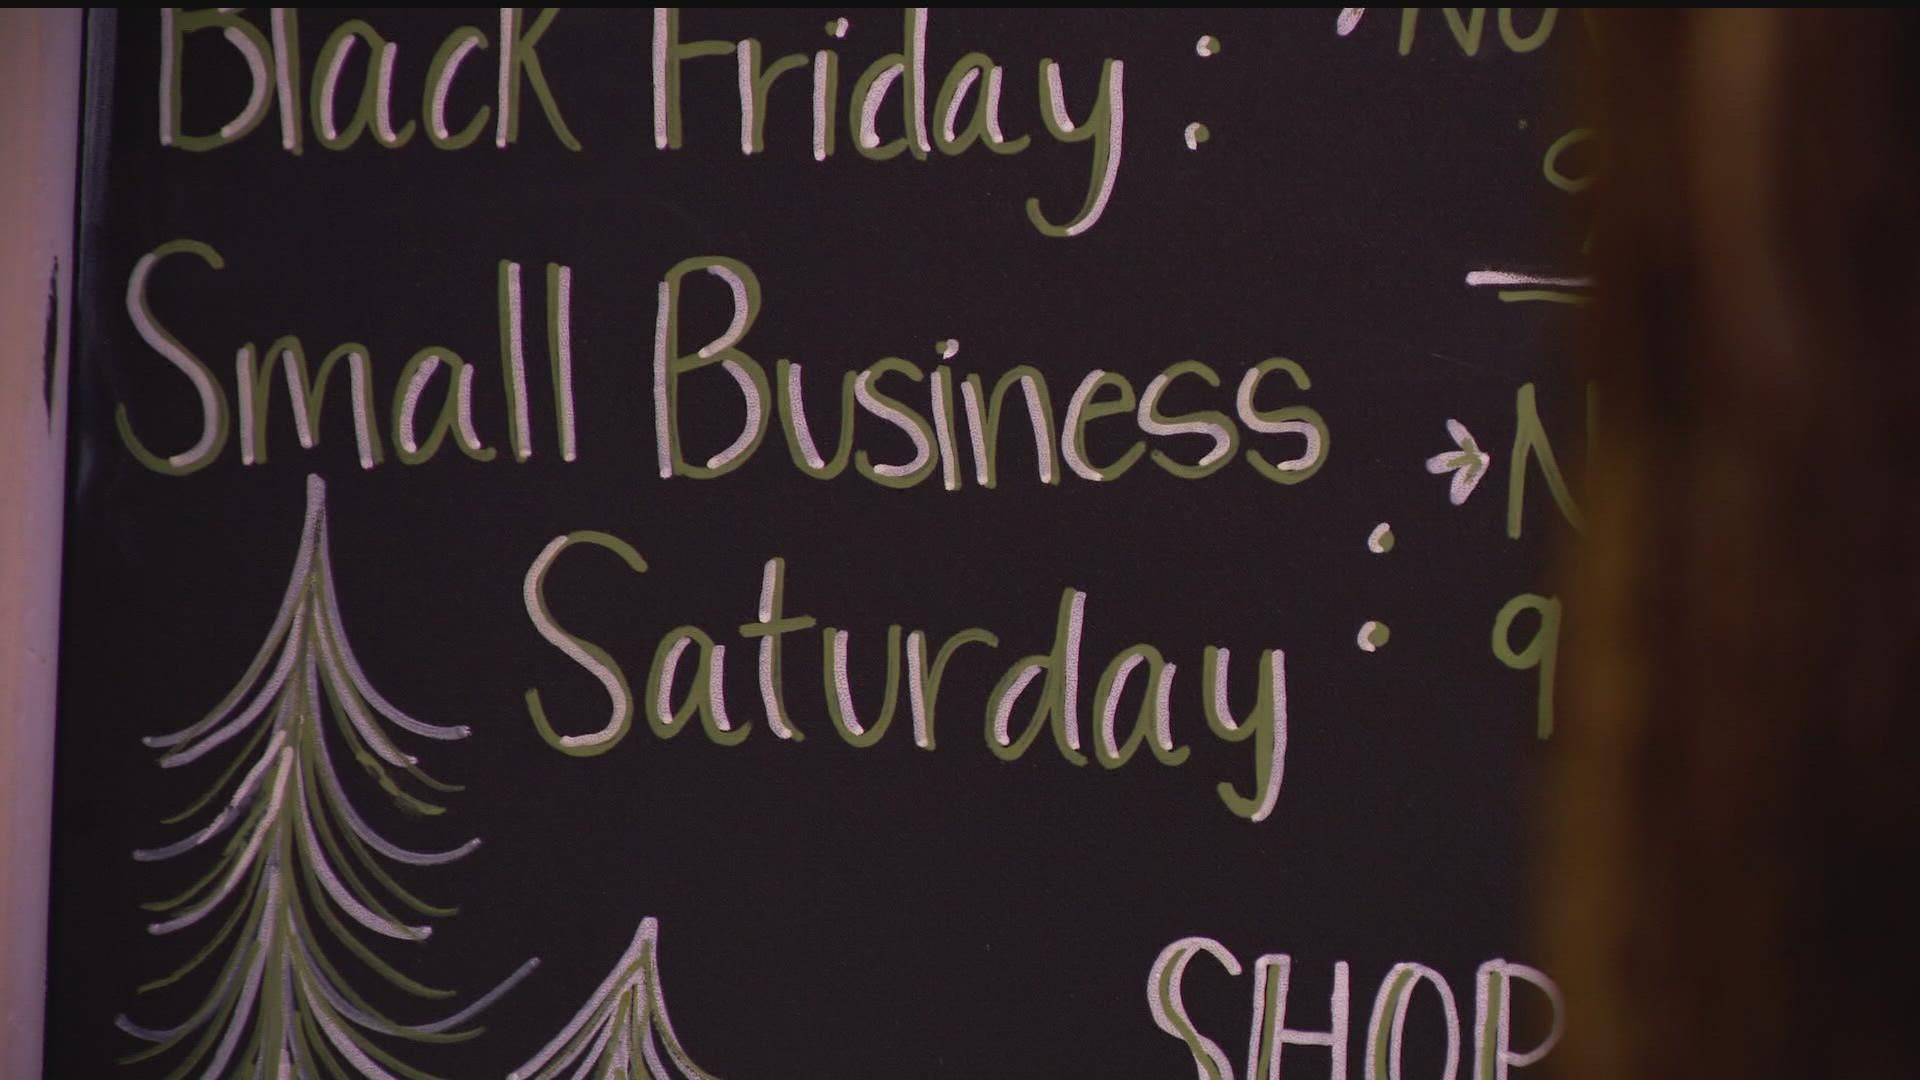 Small Business Saturday is once again upon us, so we put together an ongoing list of the best deals and events happening this weekend in the metro.